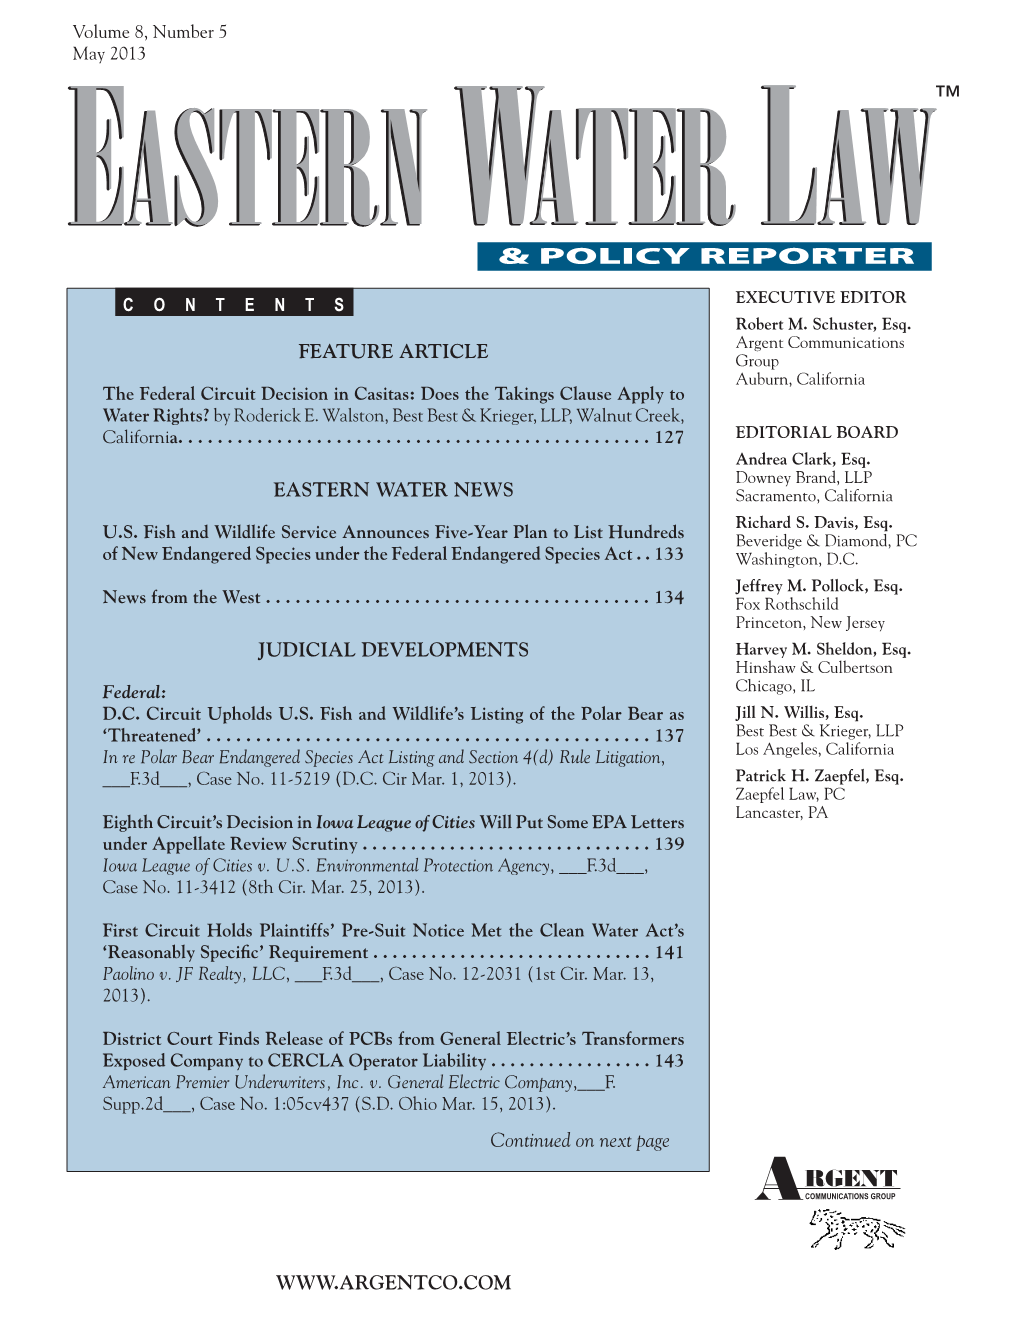 Argent Communications FEATURE ARTICLE Group Auburn, California the Federal Circuit Decision in Casitas: Does the Takings Clause Apply to Water Rights? by Roderick E